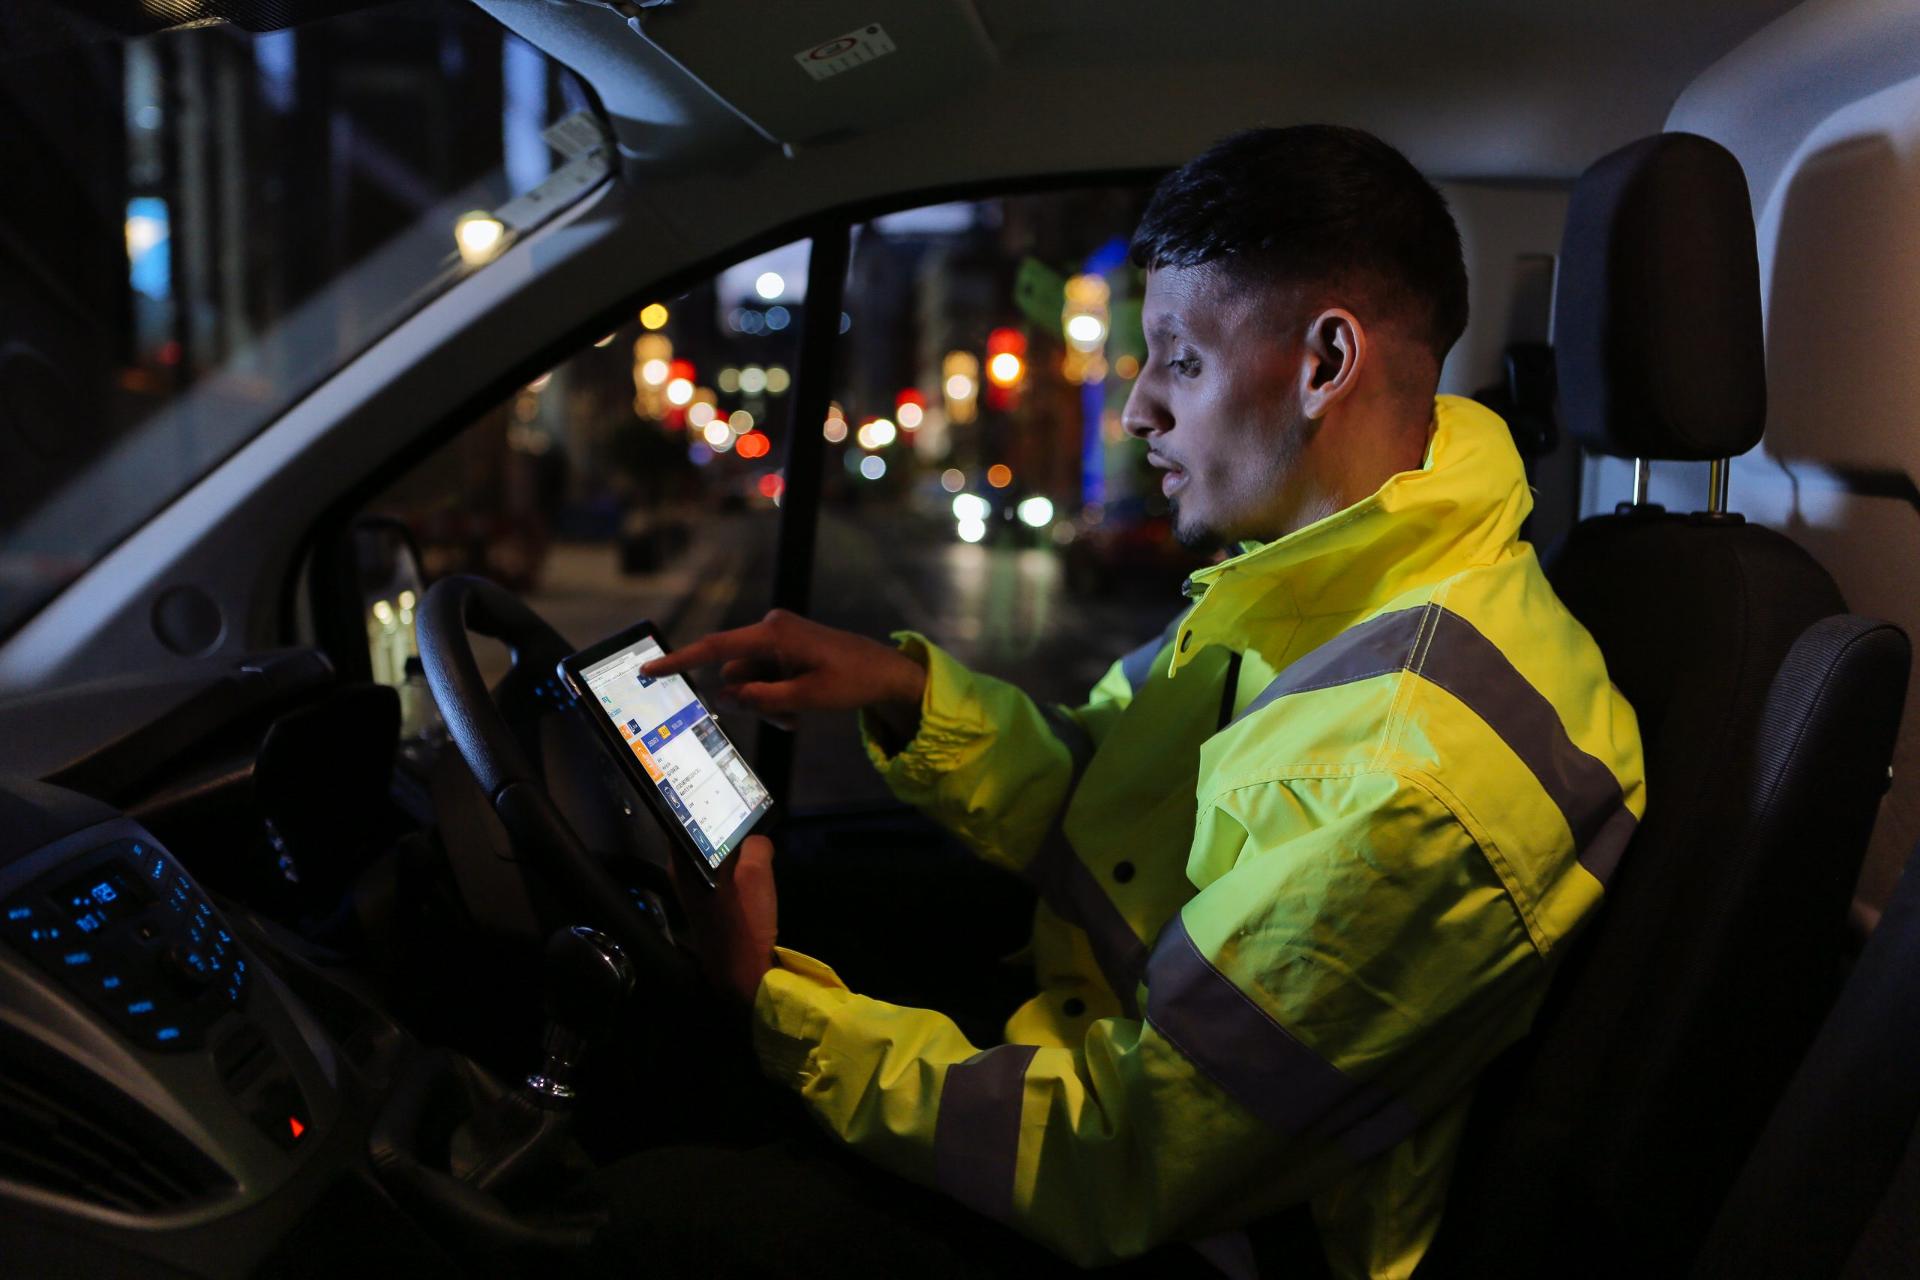 Fleet management firm acquired out of administration by Met Police